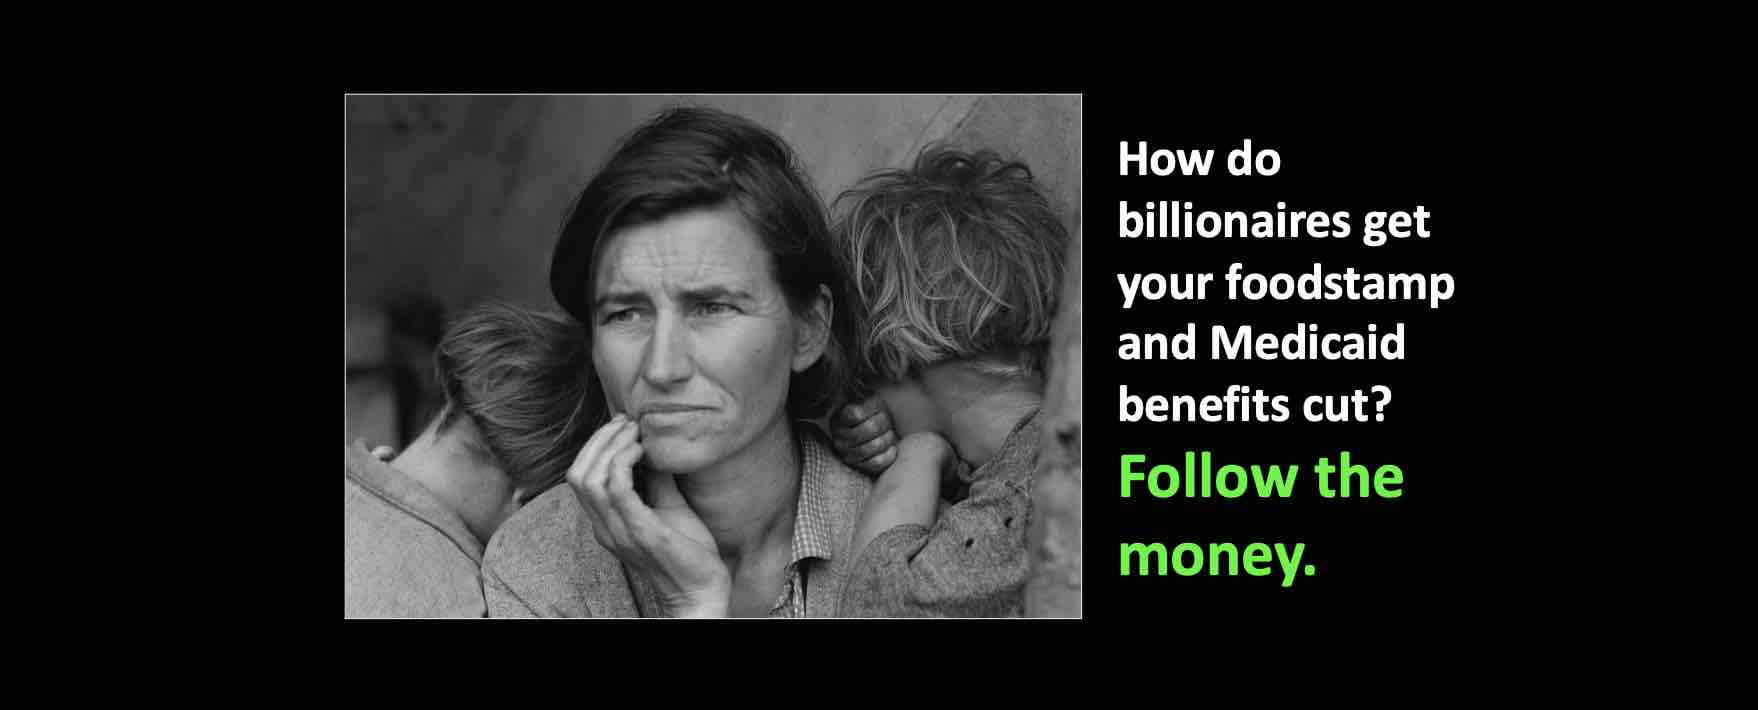 Follow the money to understand how billionaires get your foodstamp and Medicaid benefits cut